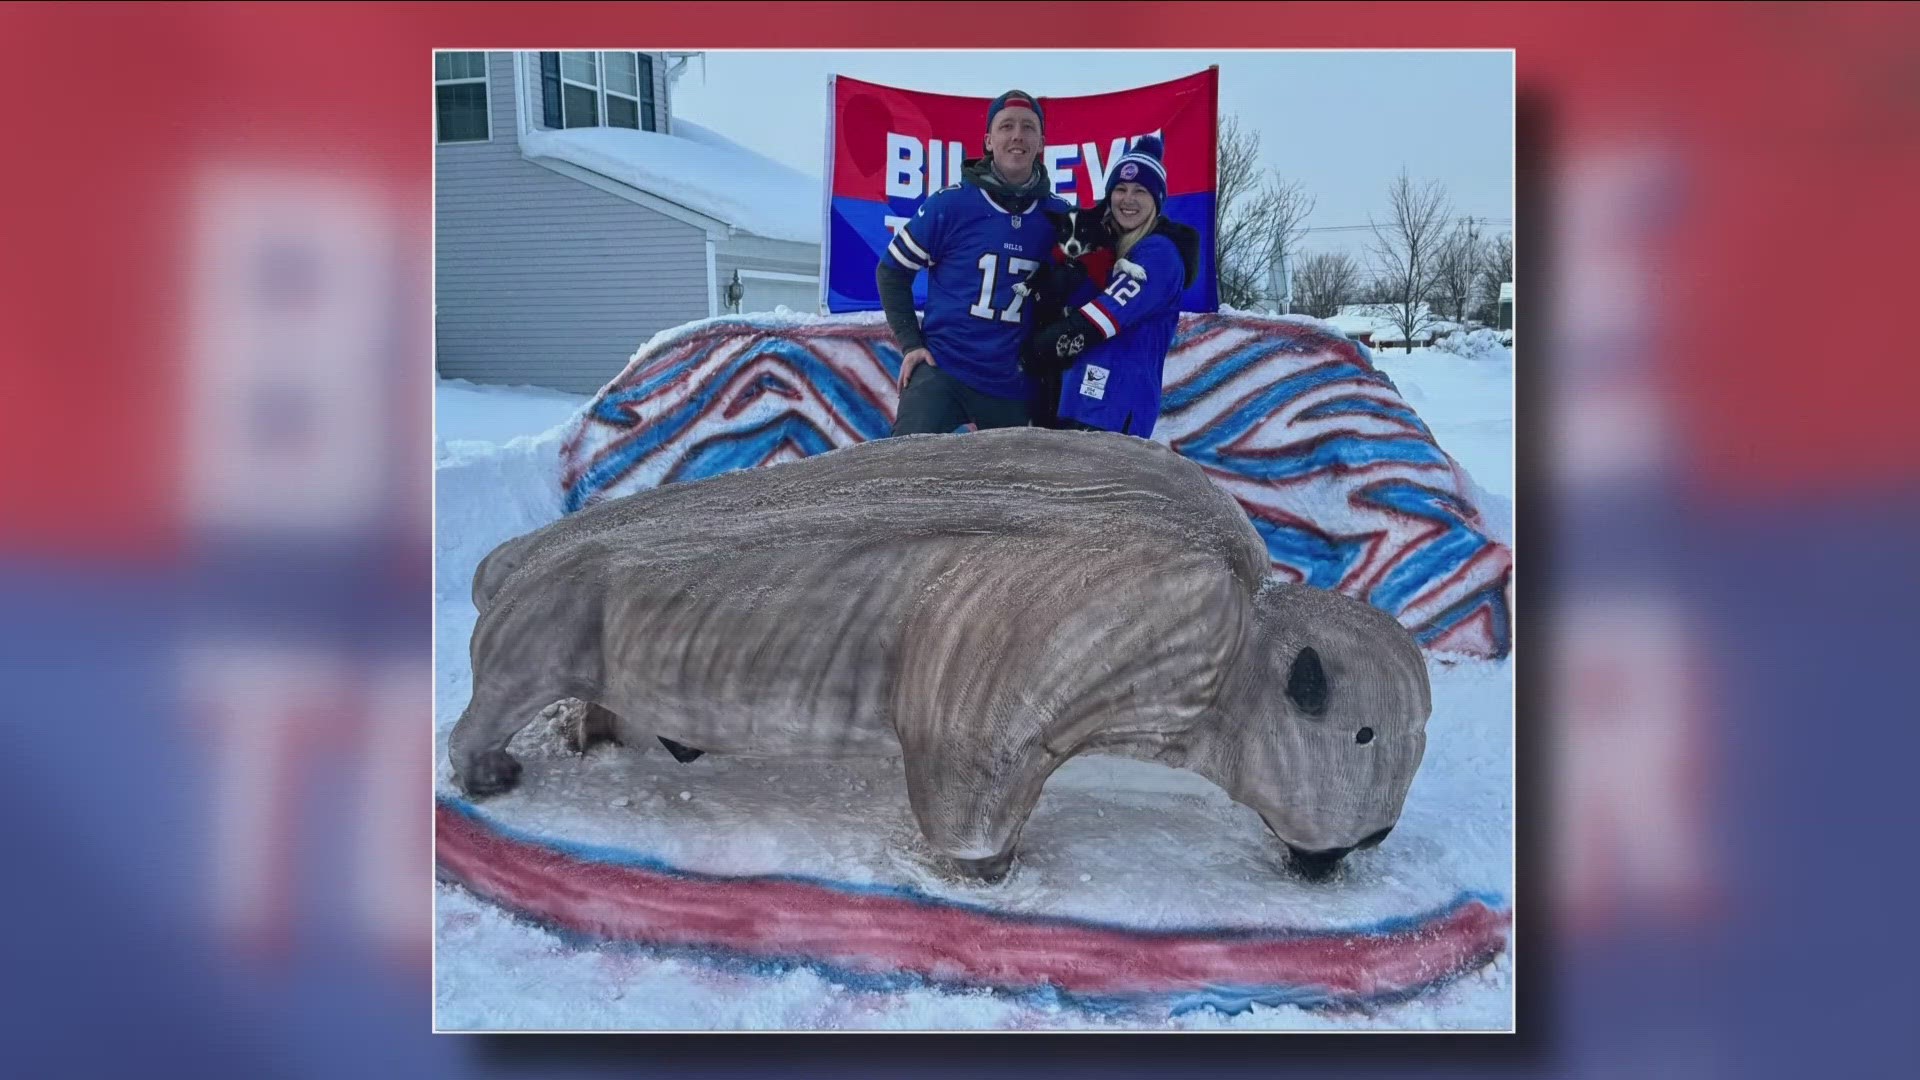 Brent Bliss sculpted a giant buffalo out of snow as a display of his team spirit.